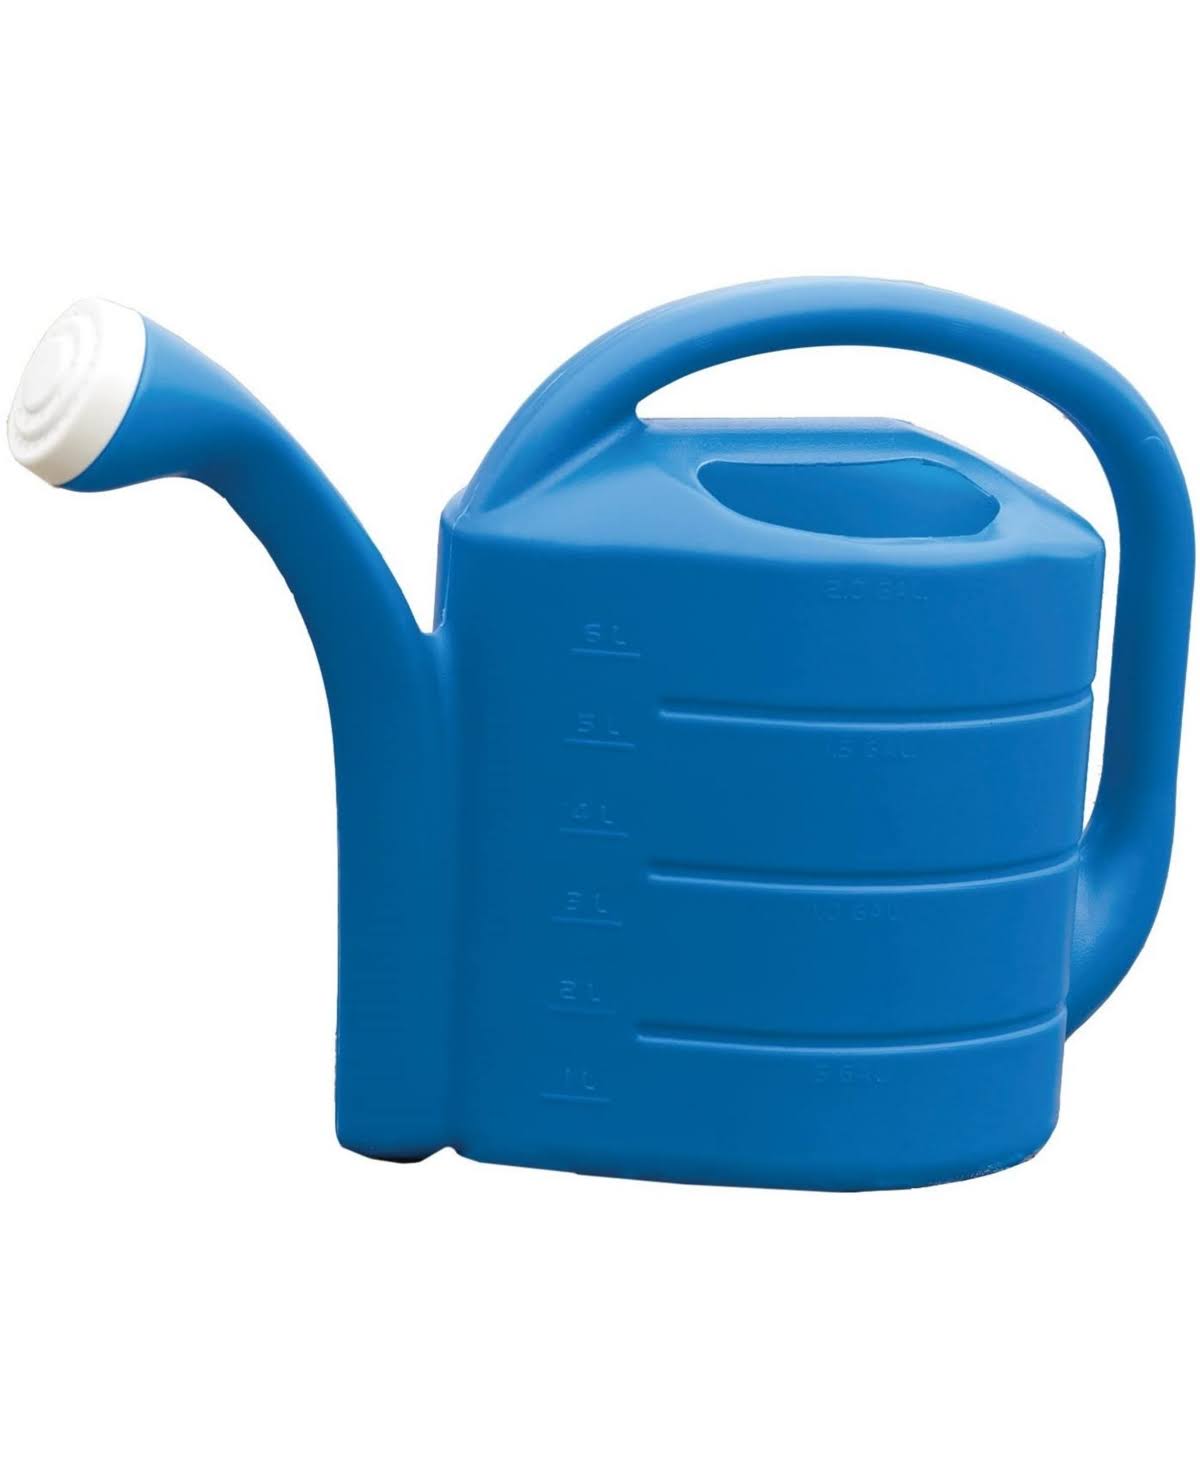 Novelty 30409 Watering Can - Bright Blue, 2gal